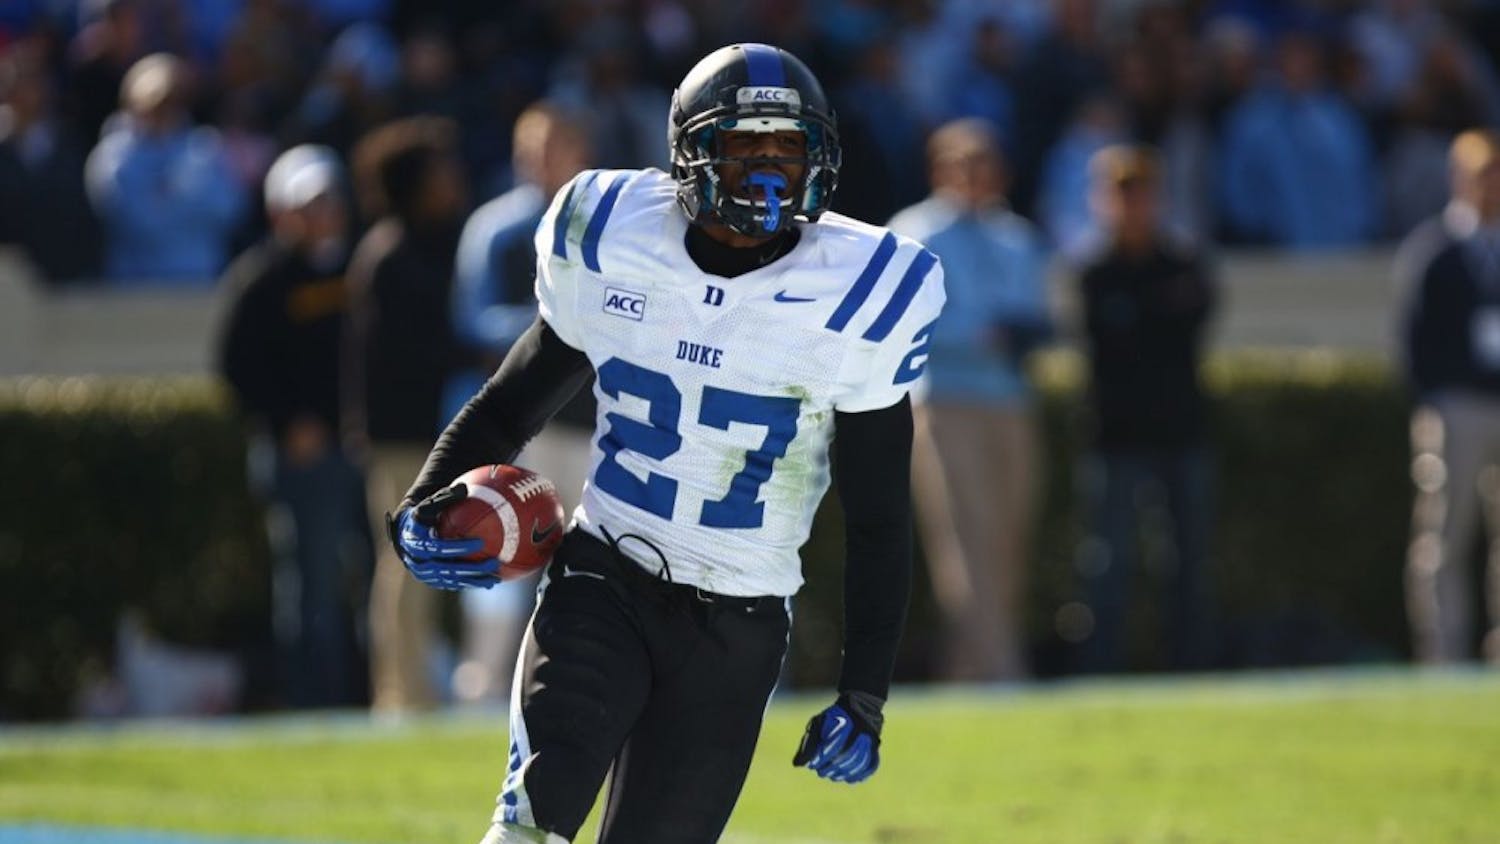 Junior DeVon Edwards silenced Kenan Stadium with a kick return in Duke's 2013 win against North Carolina. Special teams could again play a huge factor in the Blue Devils' Saturday tilt against the Tar Heels.